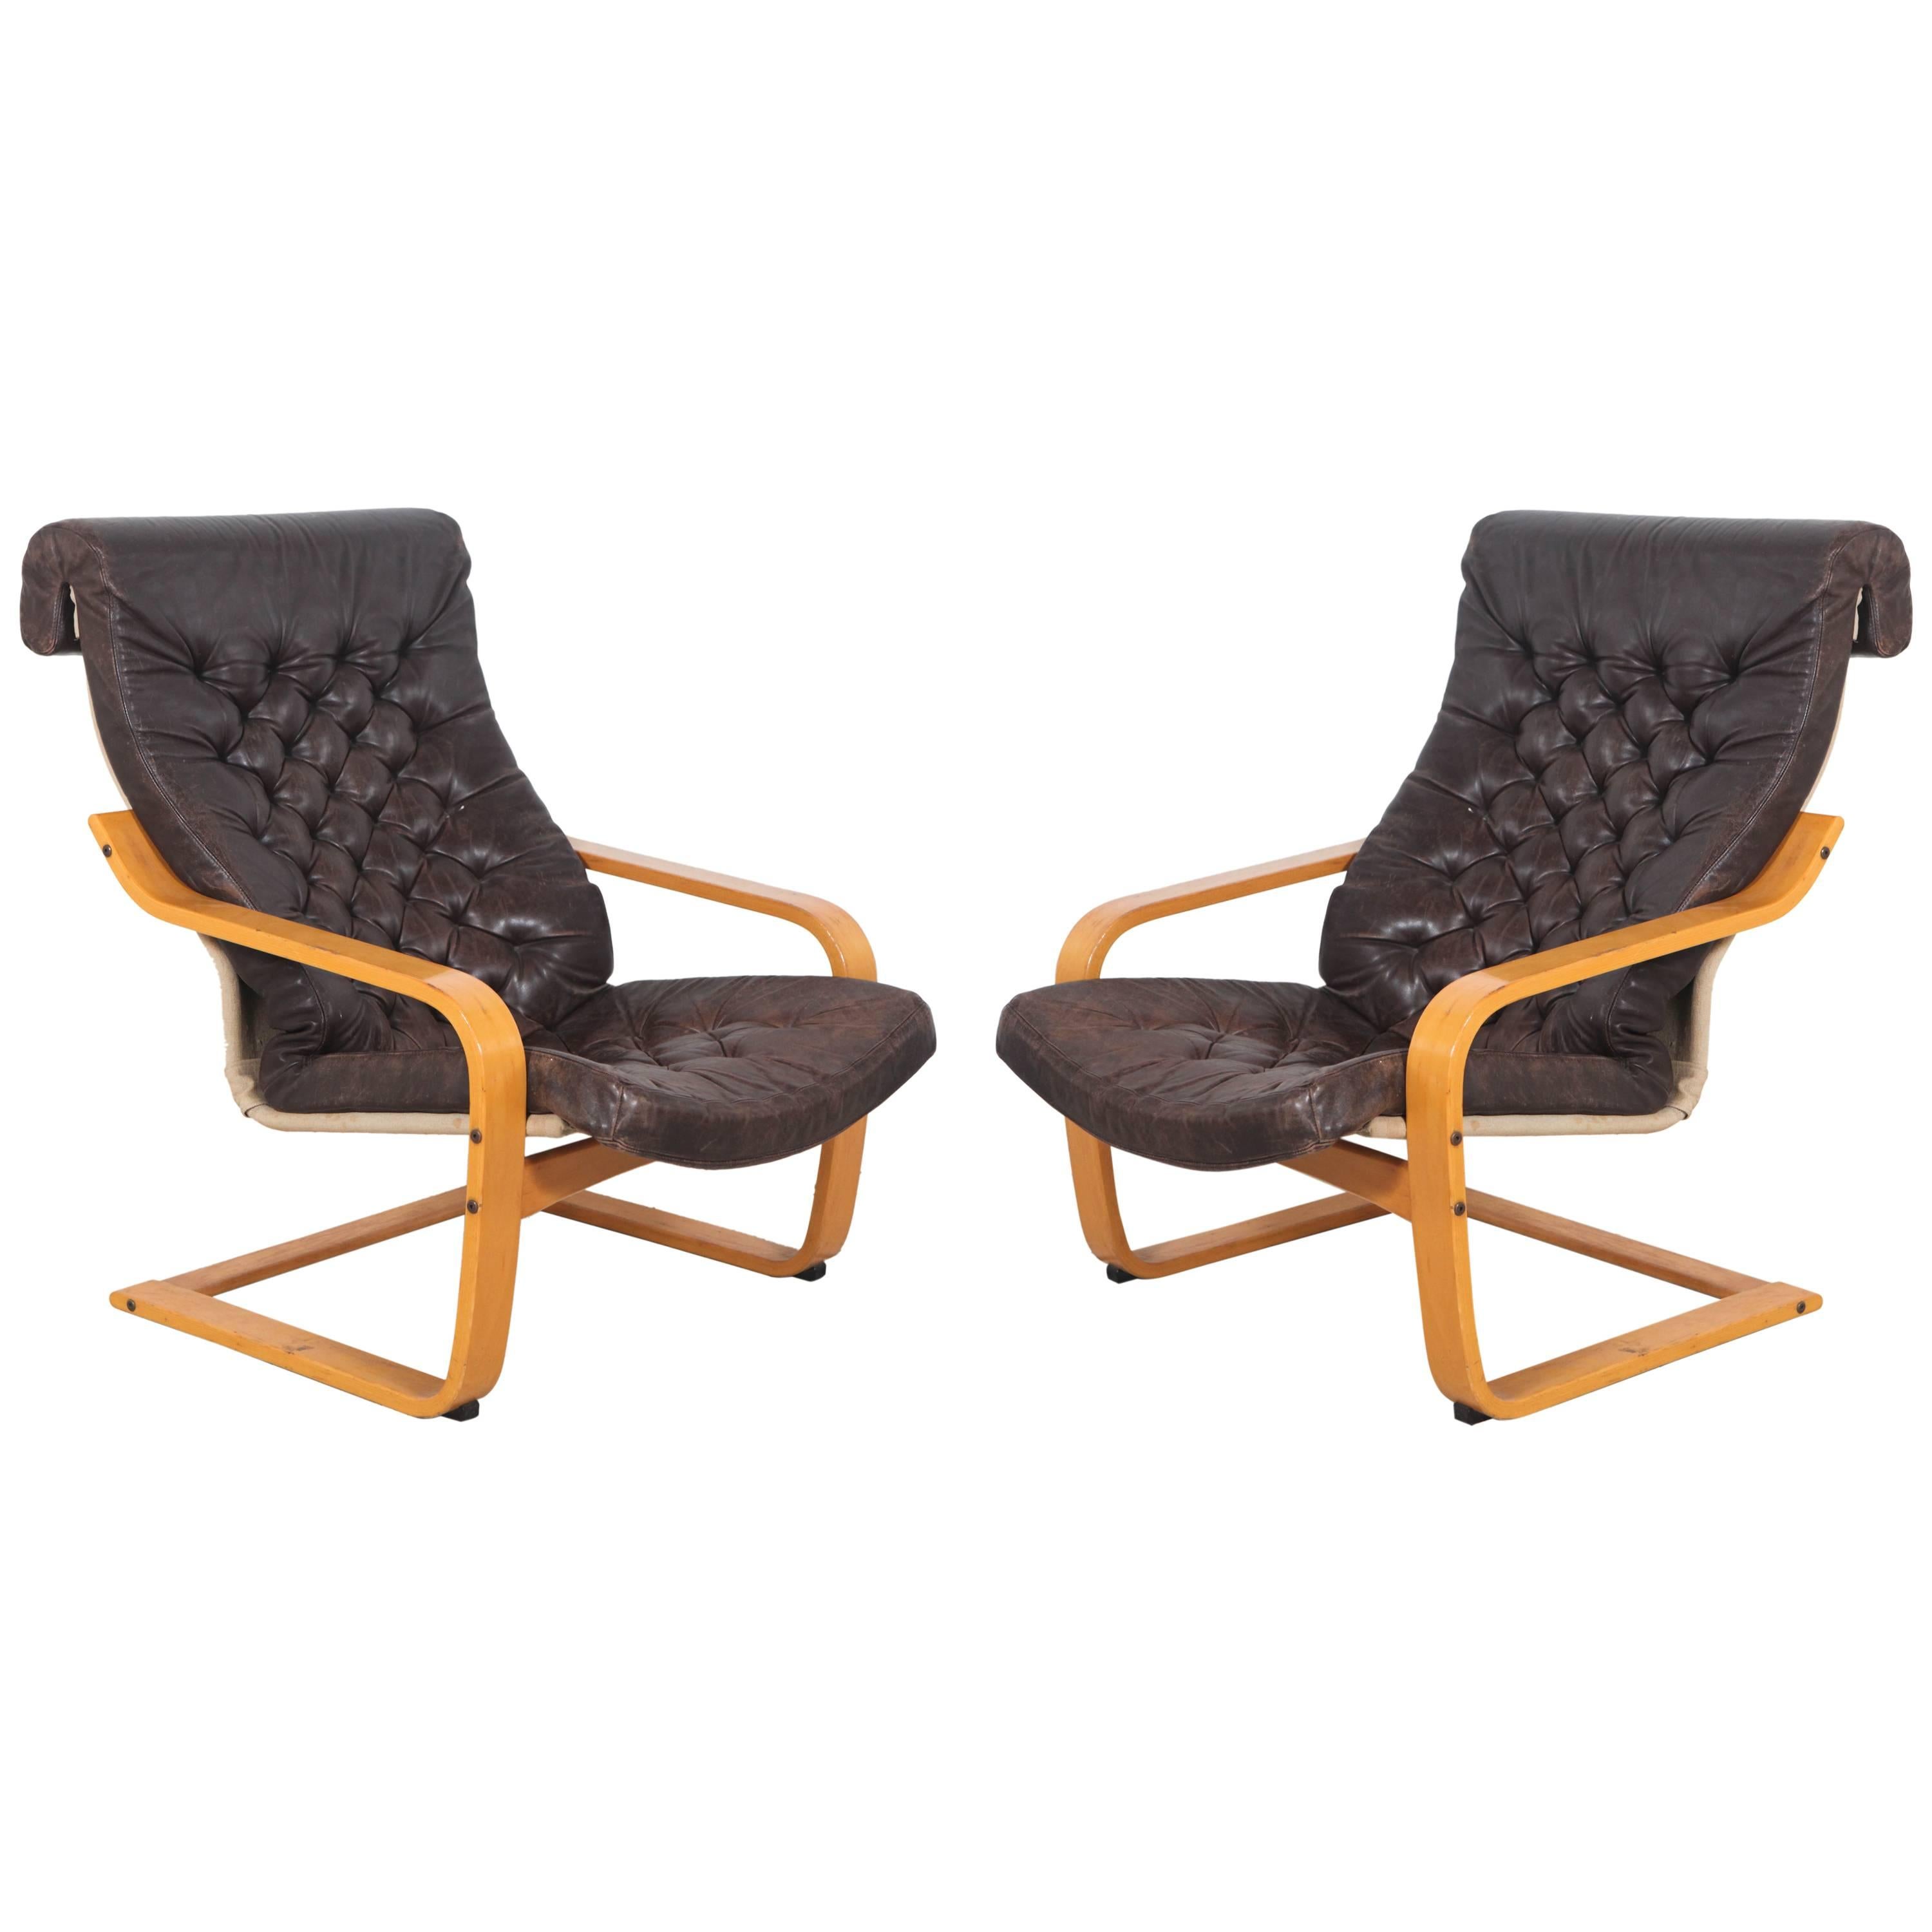 Pair of Original POEM Chairs in Tufted Black Leather by Noboru Nakamura for IKEA